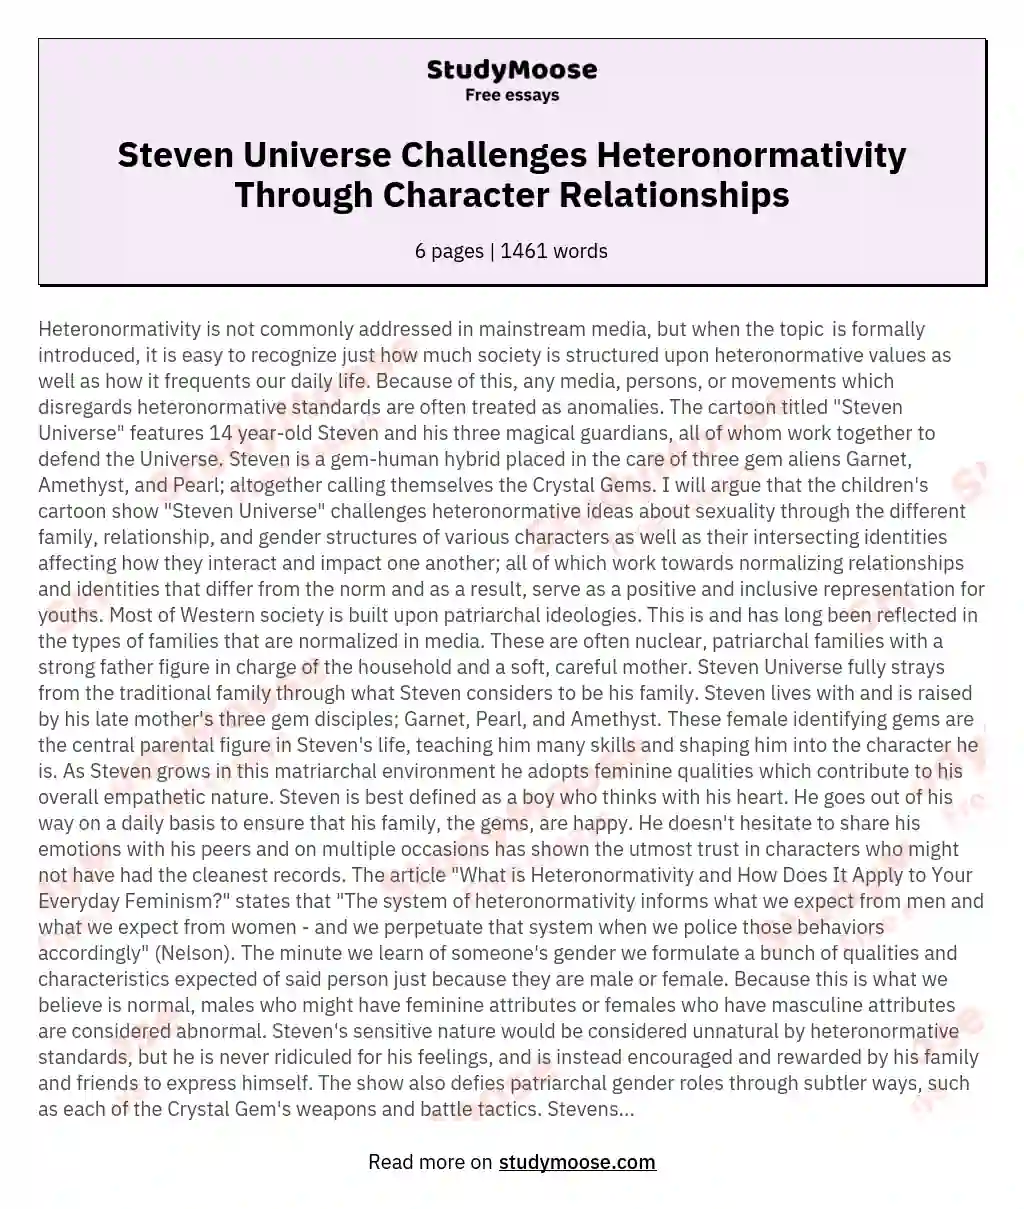 Steven Universe Challenges Heteronormativity Through Character Relationships essay